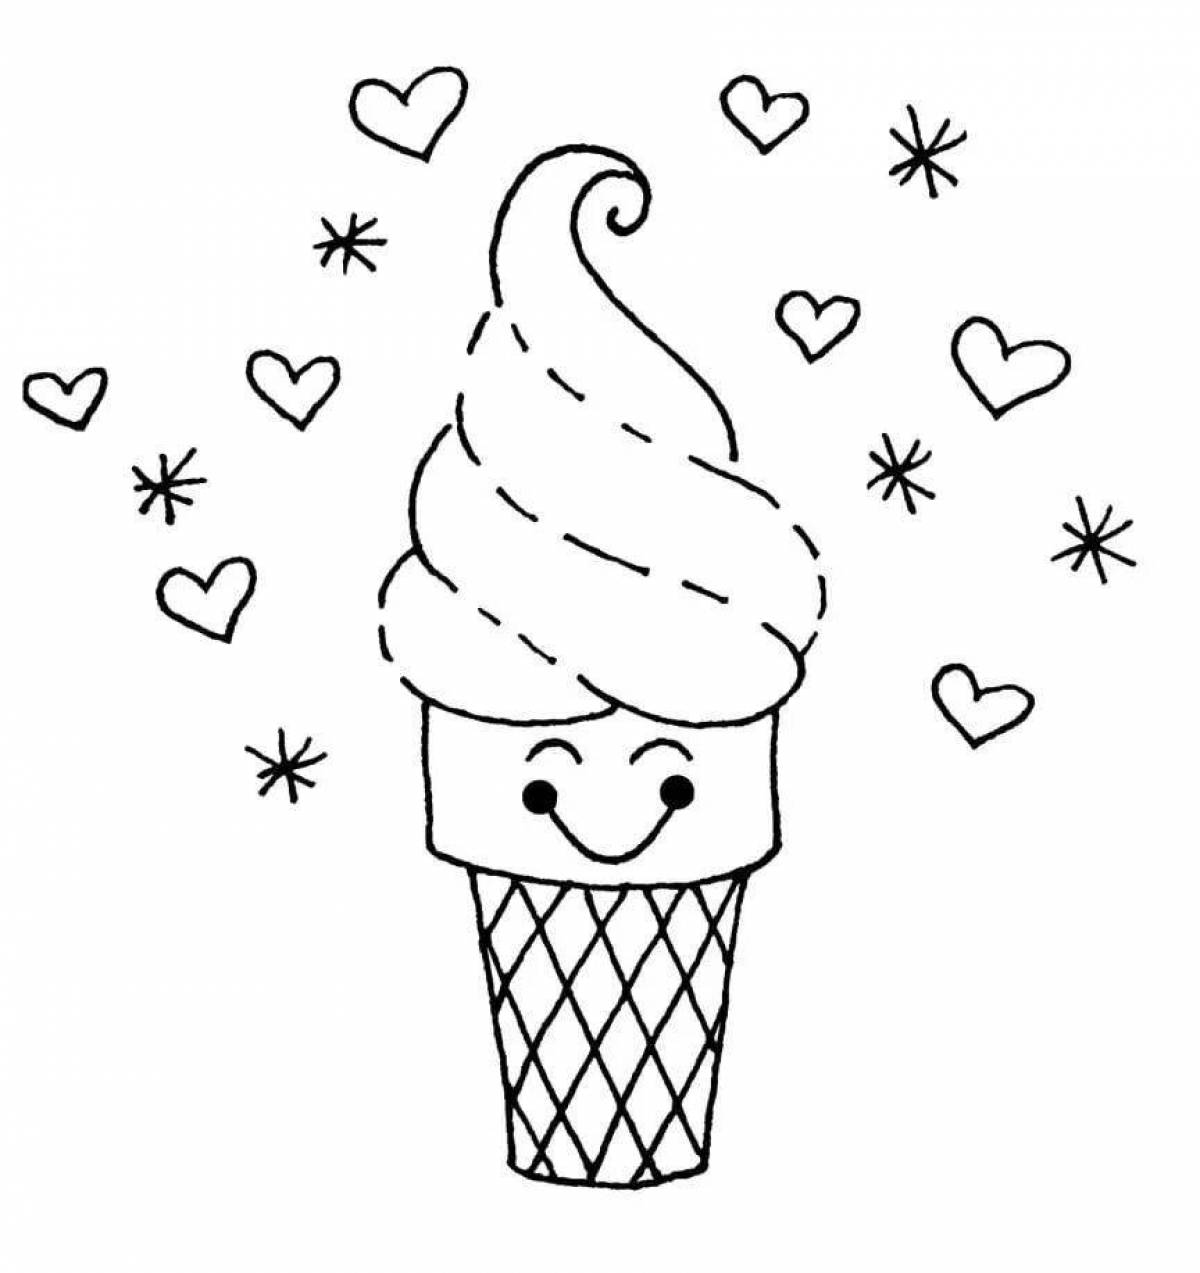 Adorable ice cream coloring book for teens